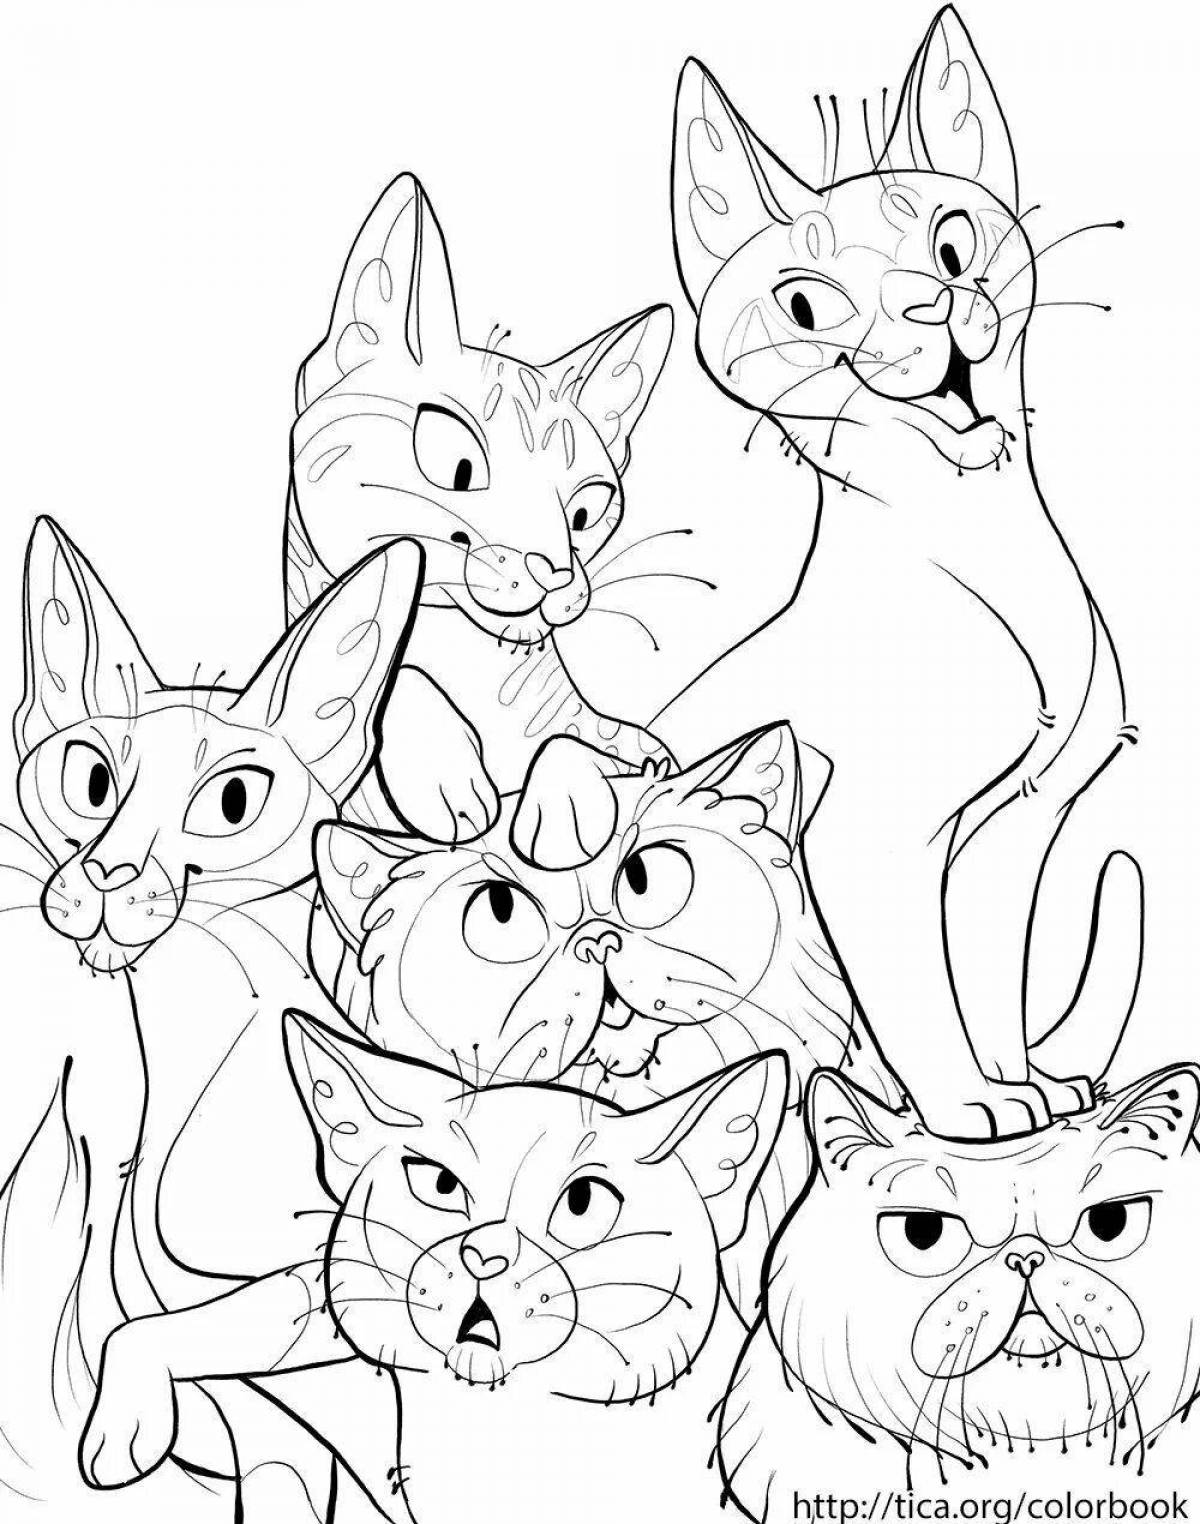 Naughty all cats coloring book